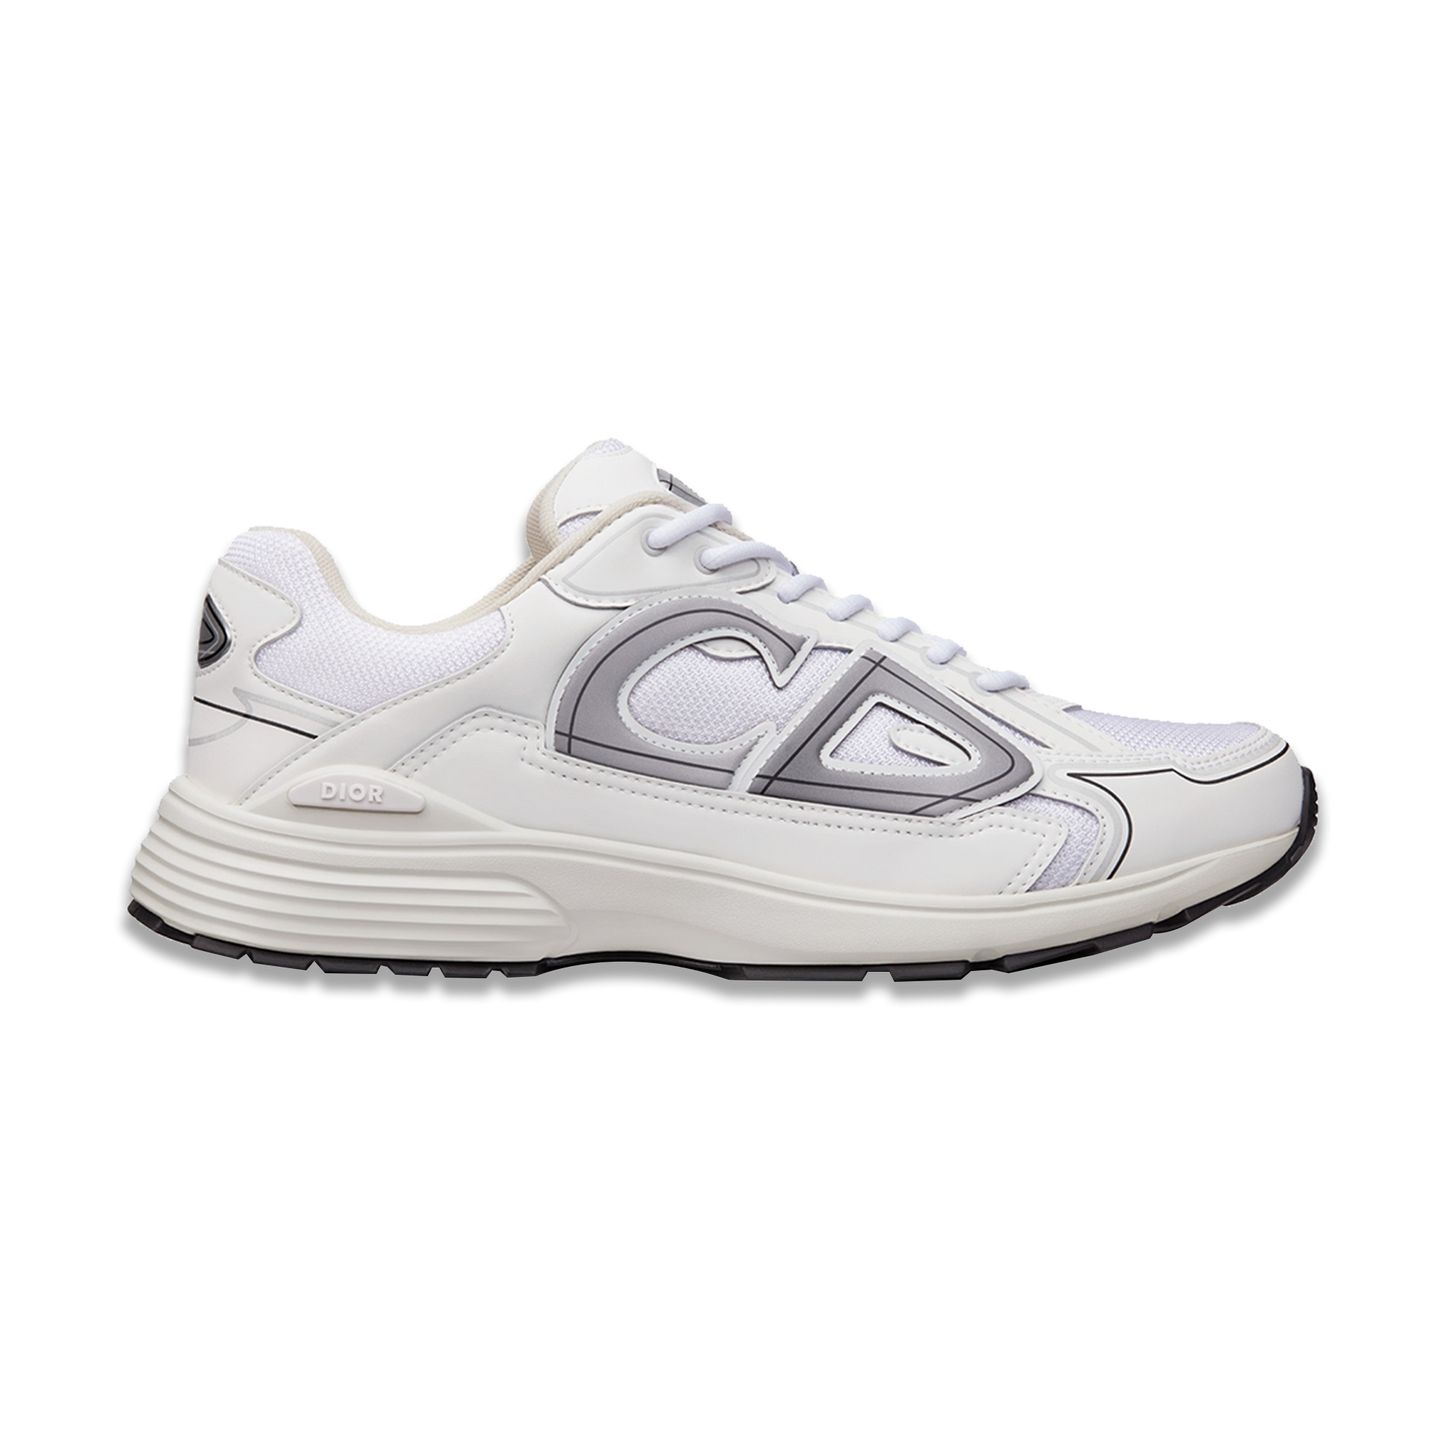 Dior B22 Technical Mesh Trainers In Light Brown in White for Men